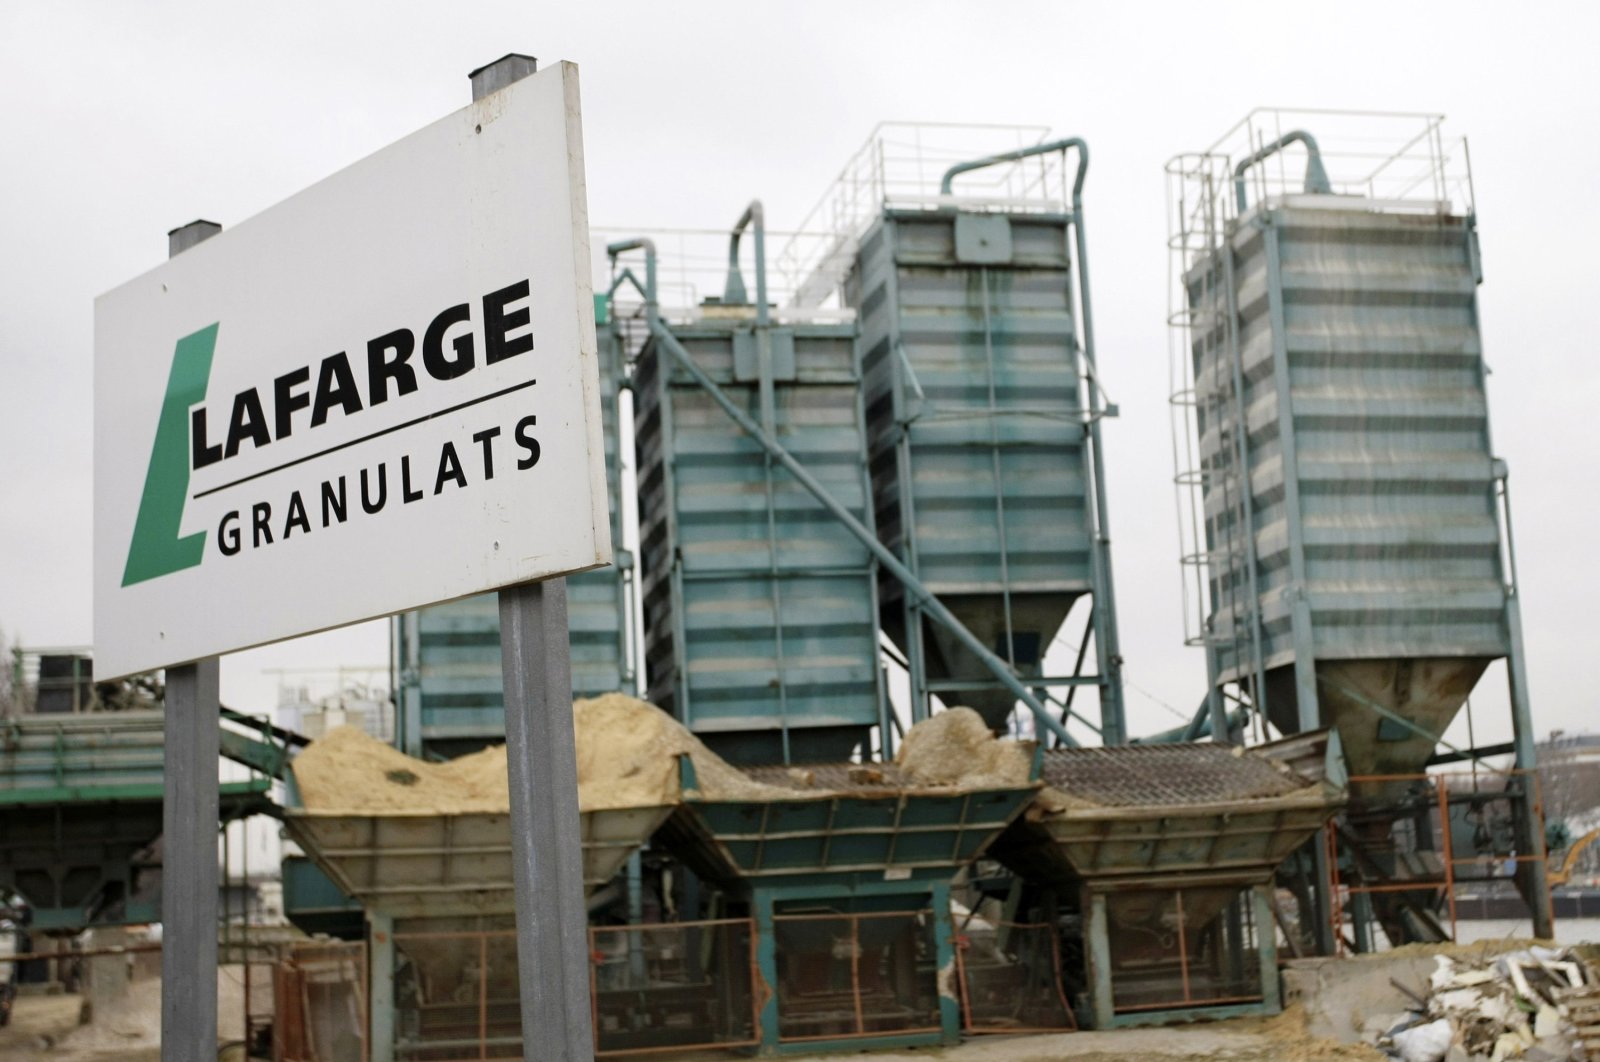 A Lafarge facility is pictured in Paris, France, Feb.18, 2009. (AP Photo)